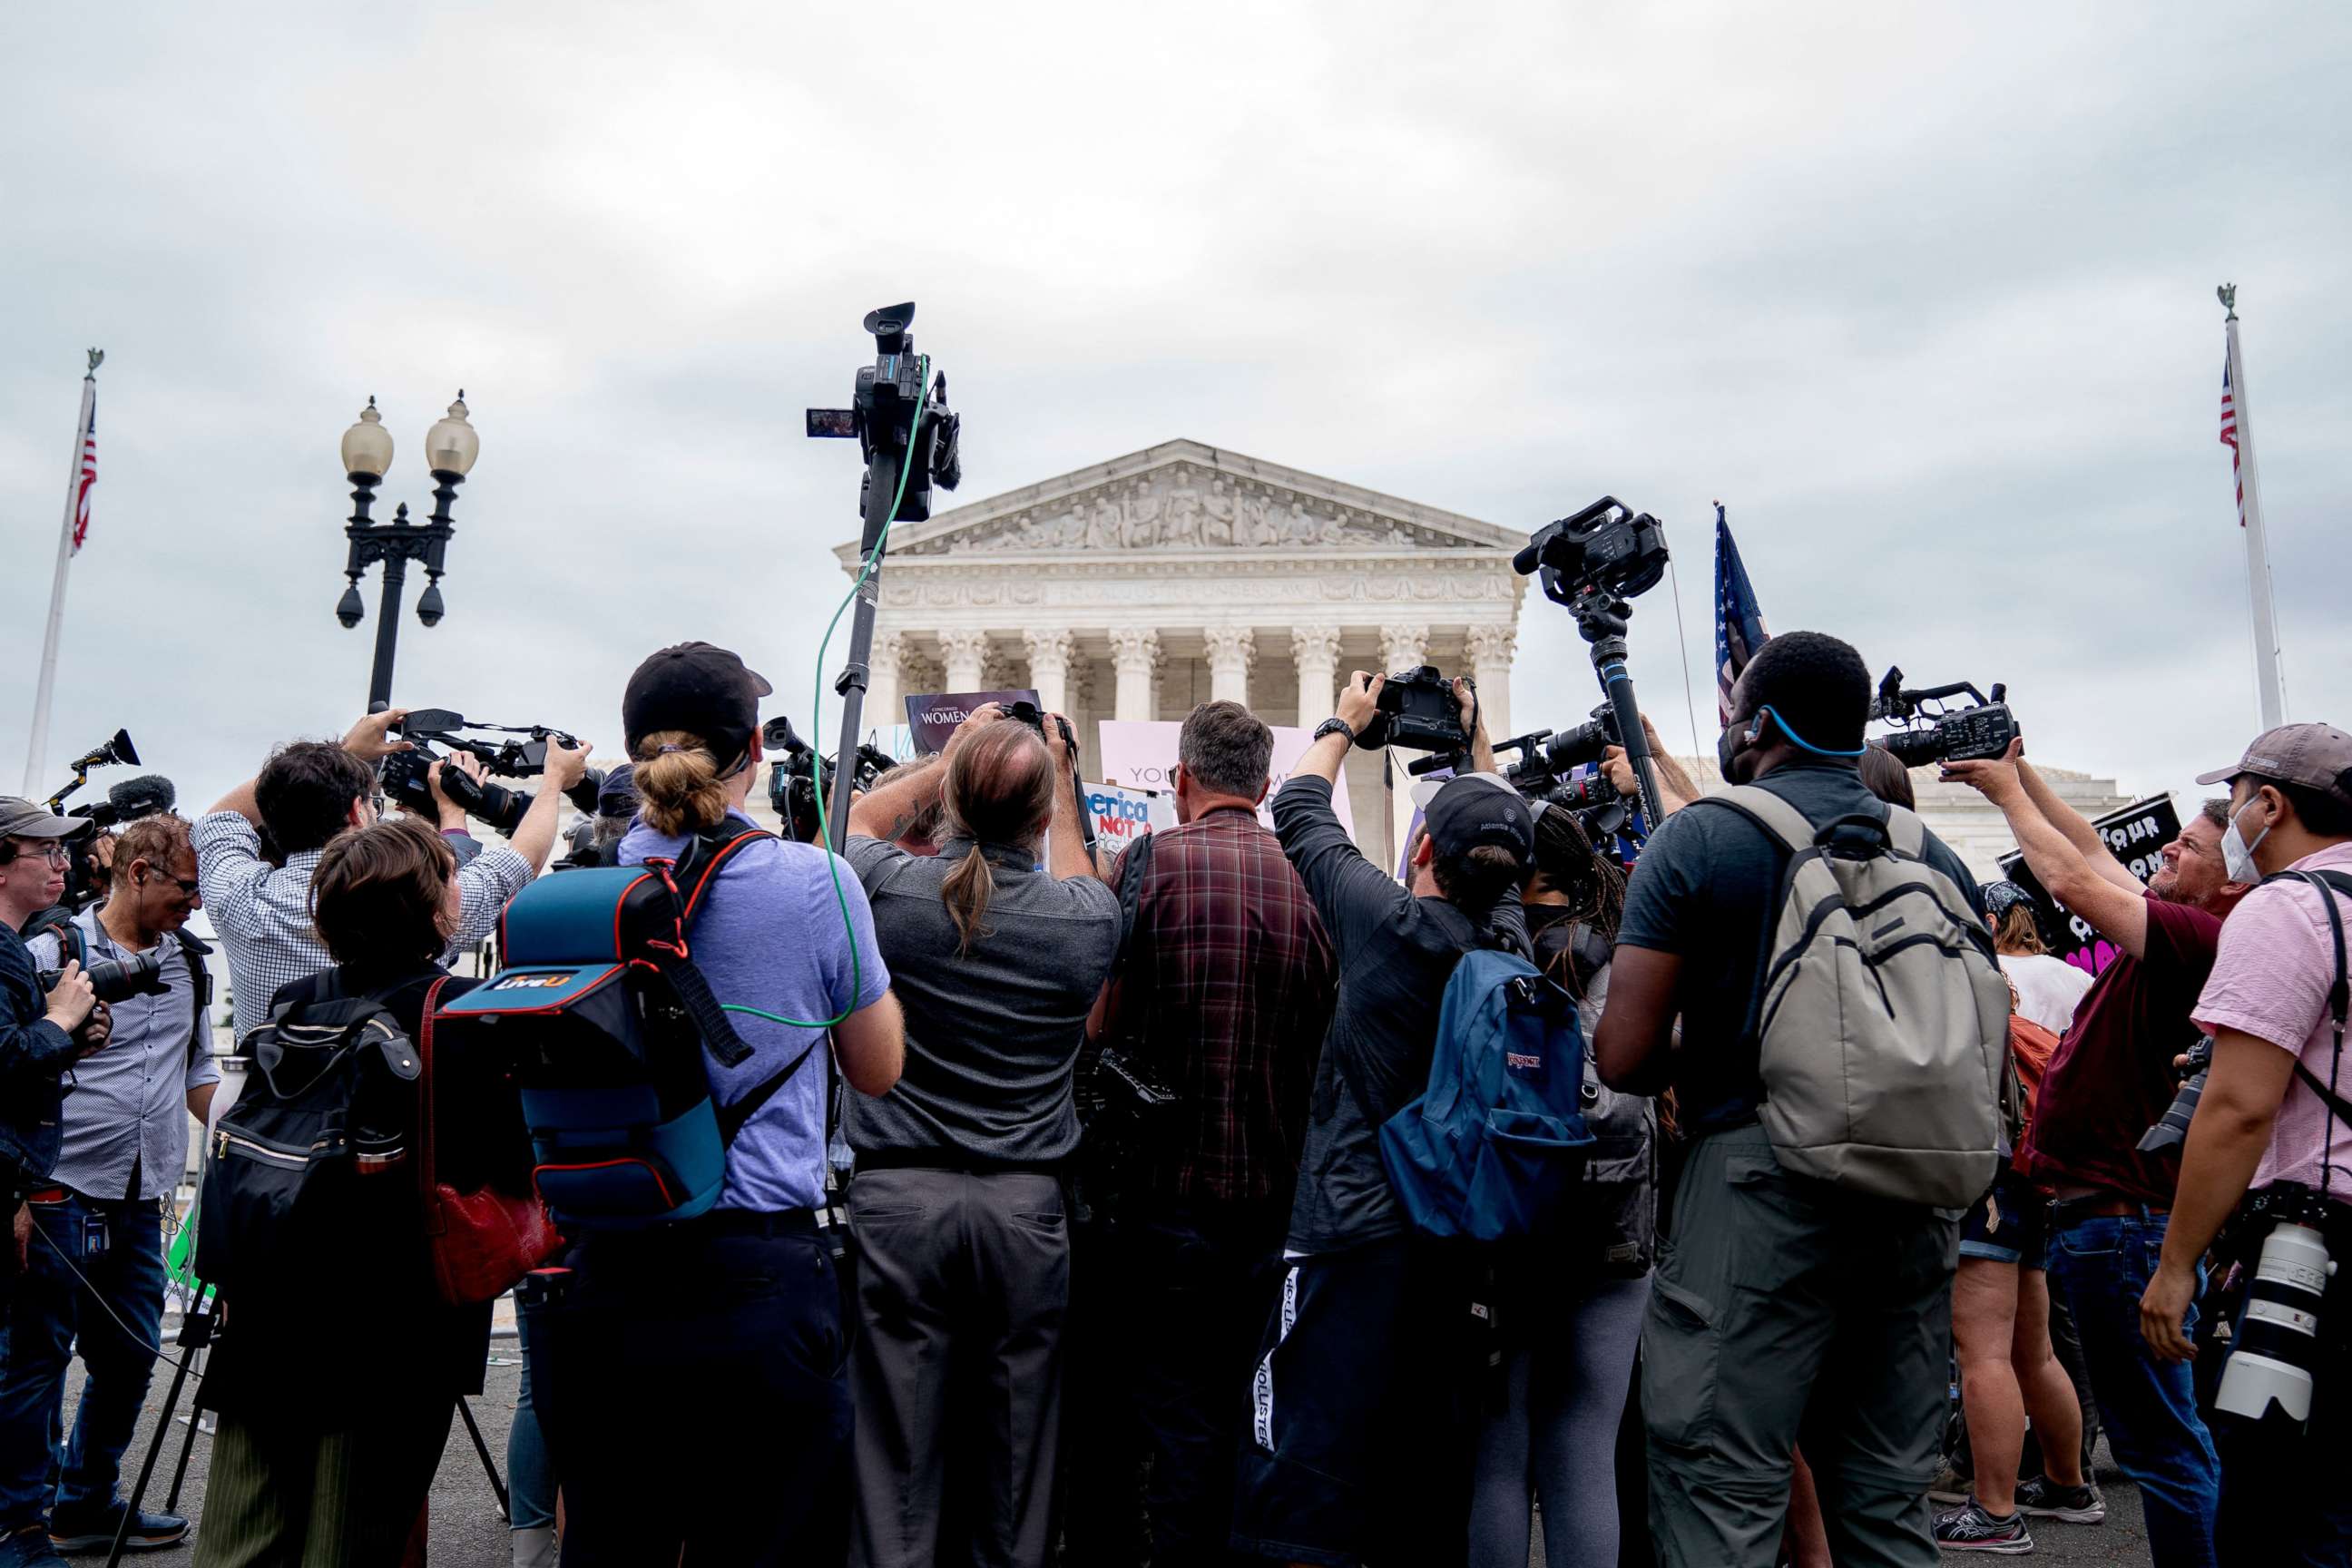 PHOTO: Members of the media gather around demonstrators outside the US Supreme Court in Washington, DC, June 21, 2022.